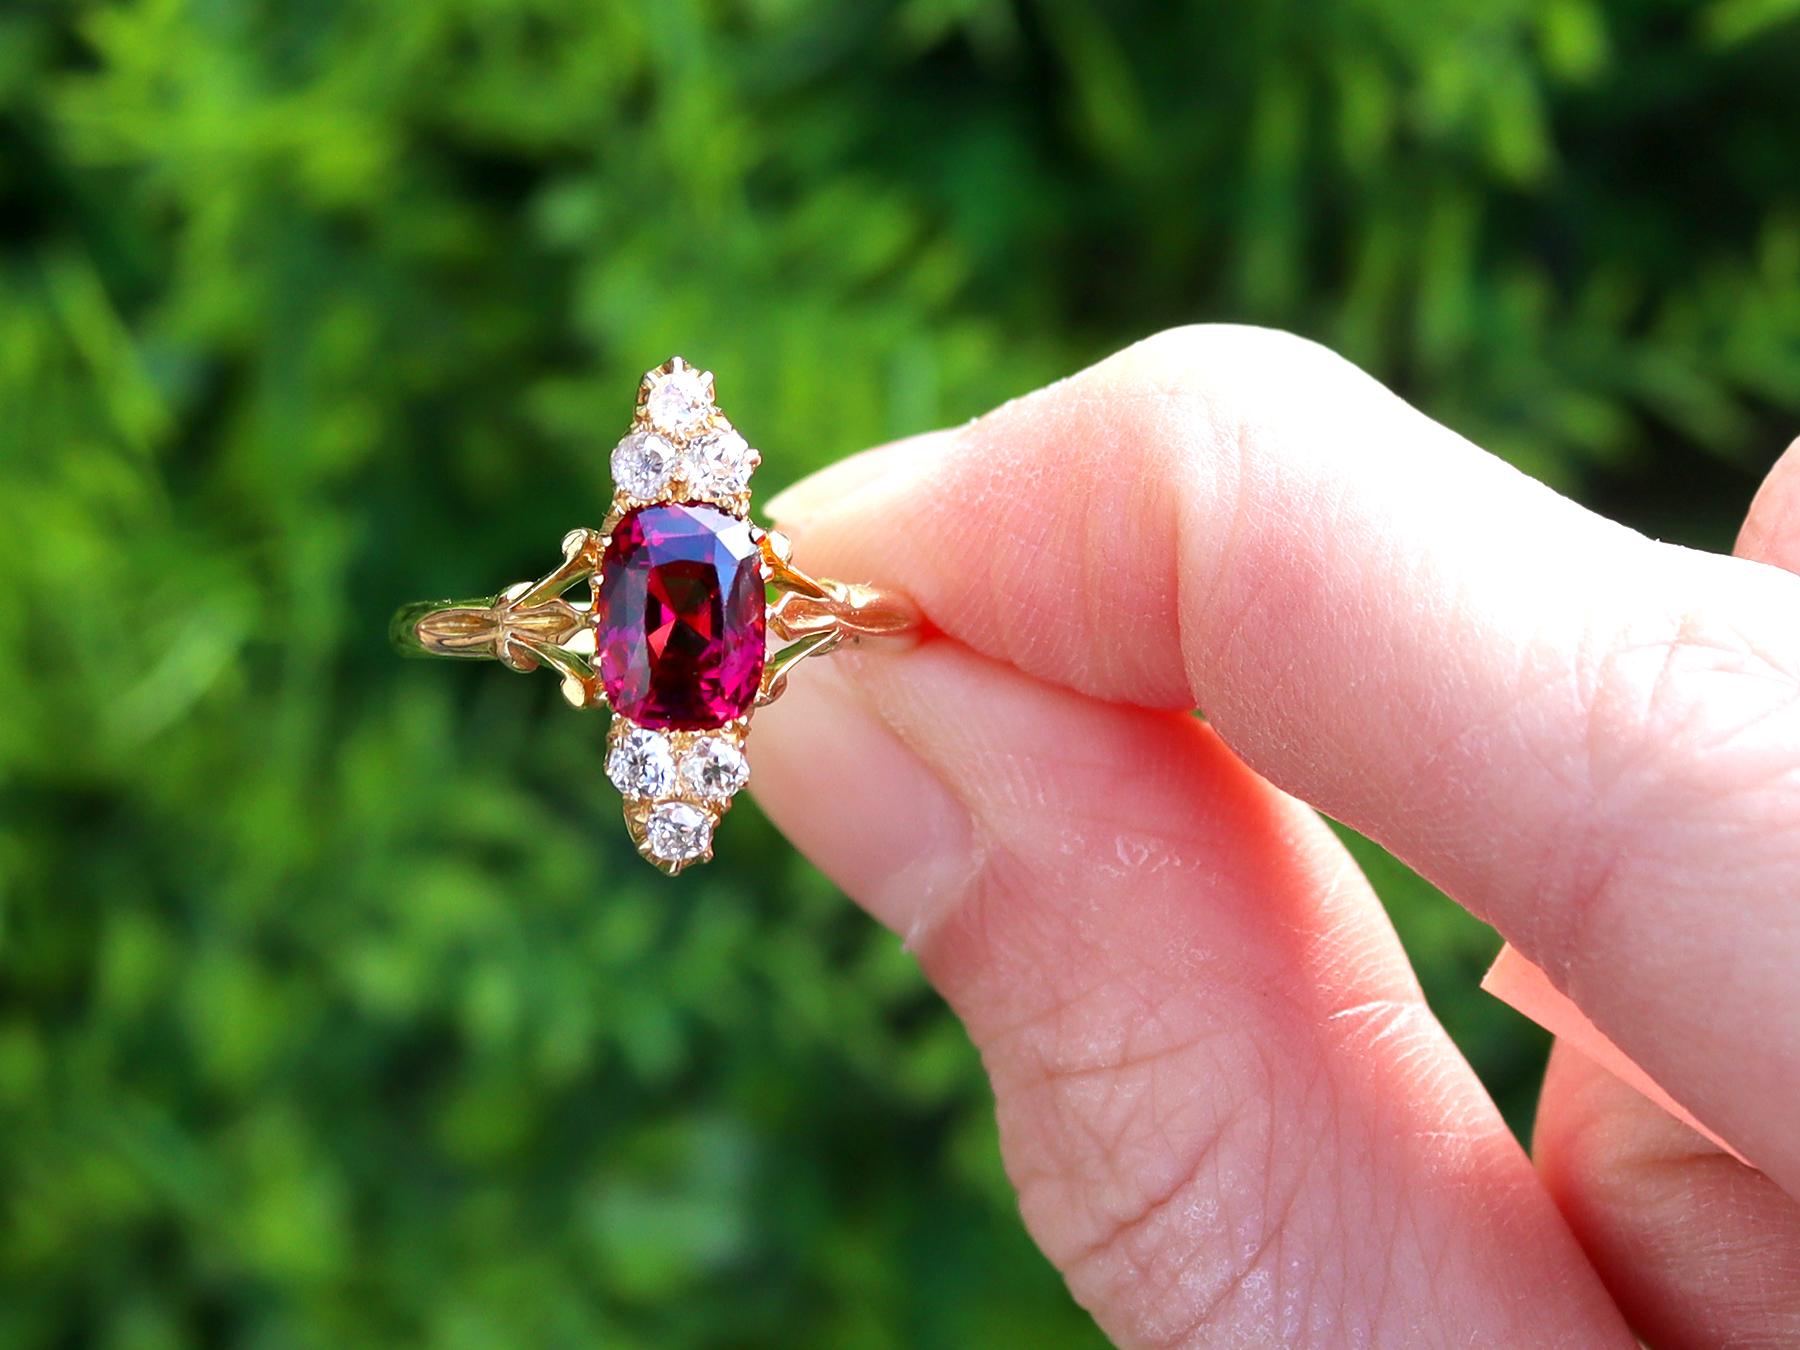 A fine and impressive vintage 2.48 carat garnet and 0.30 carat diamond, 18 karat yellow gold dress ring; part of our diverse vintage jewelry collections.

This fine and impressive antique garnet ring has been crafted in 18k yellow gold.

The pierced